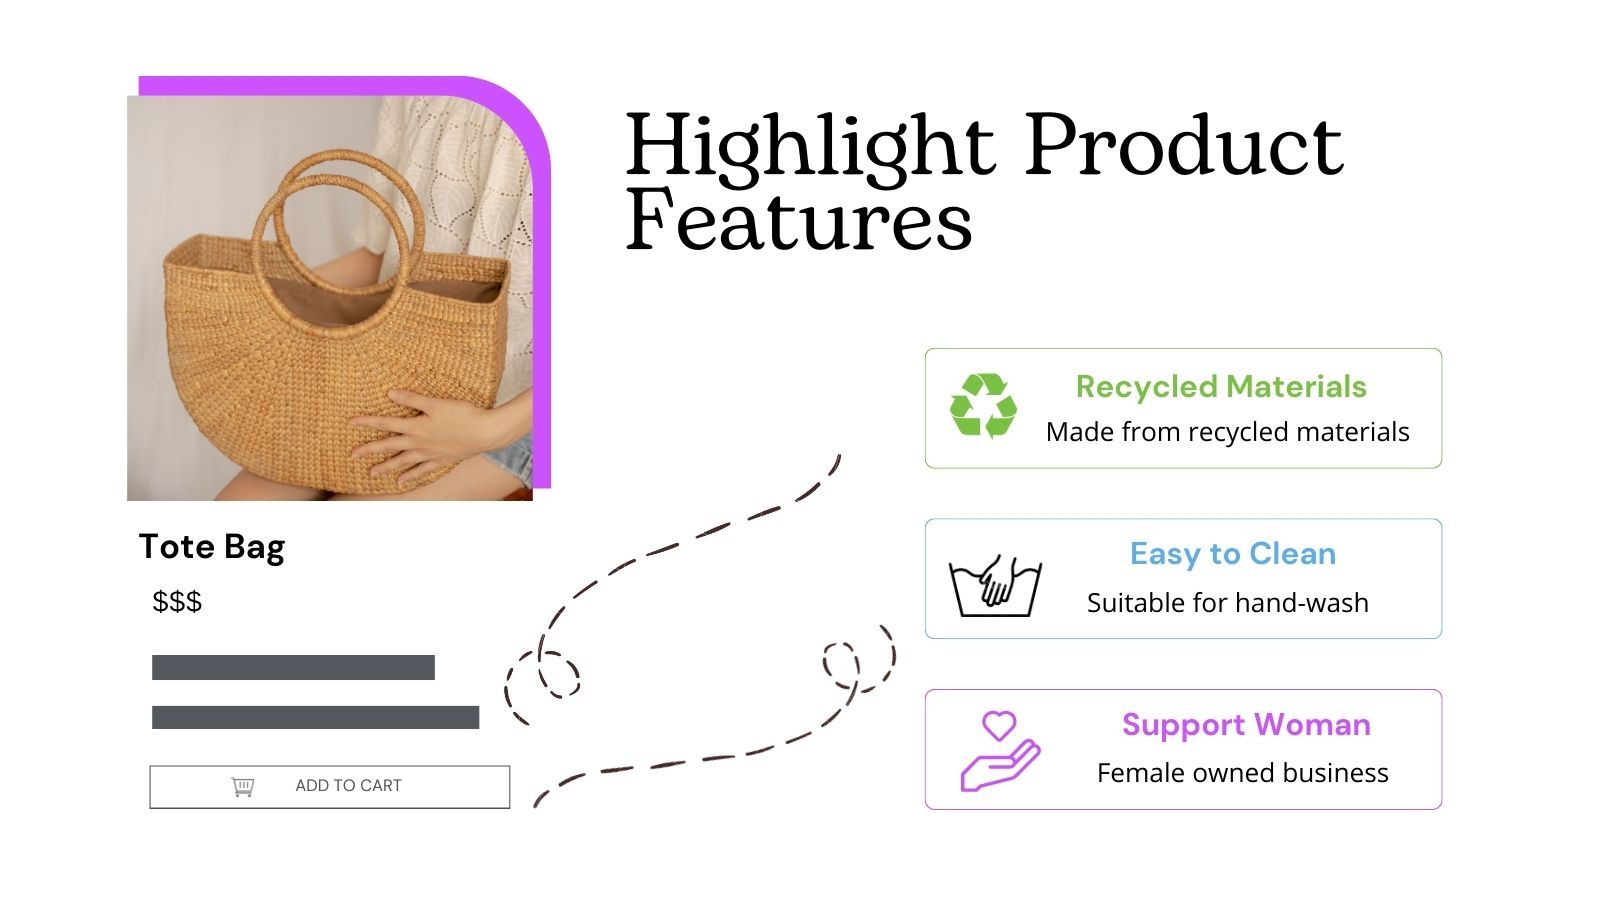 Highlight product features, descriptions reviews attributes